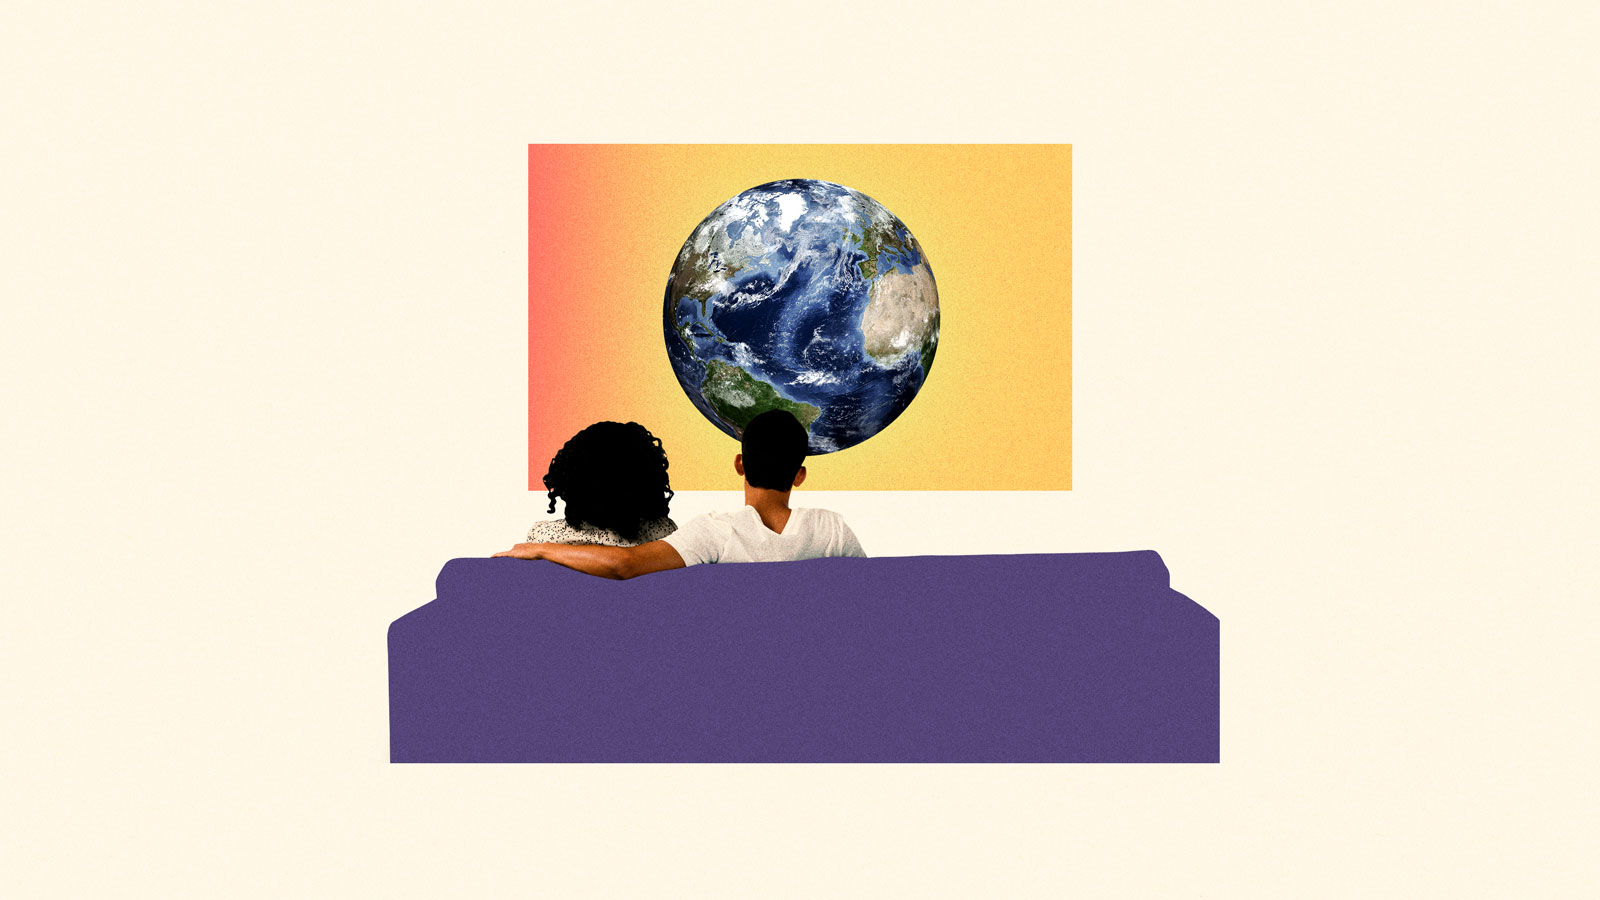 Two people watch a movie depicting climate change